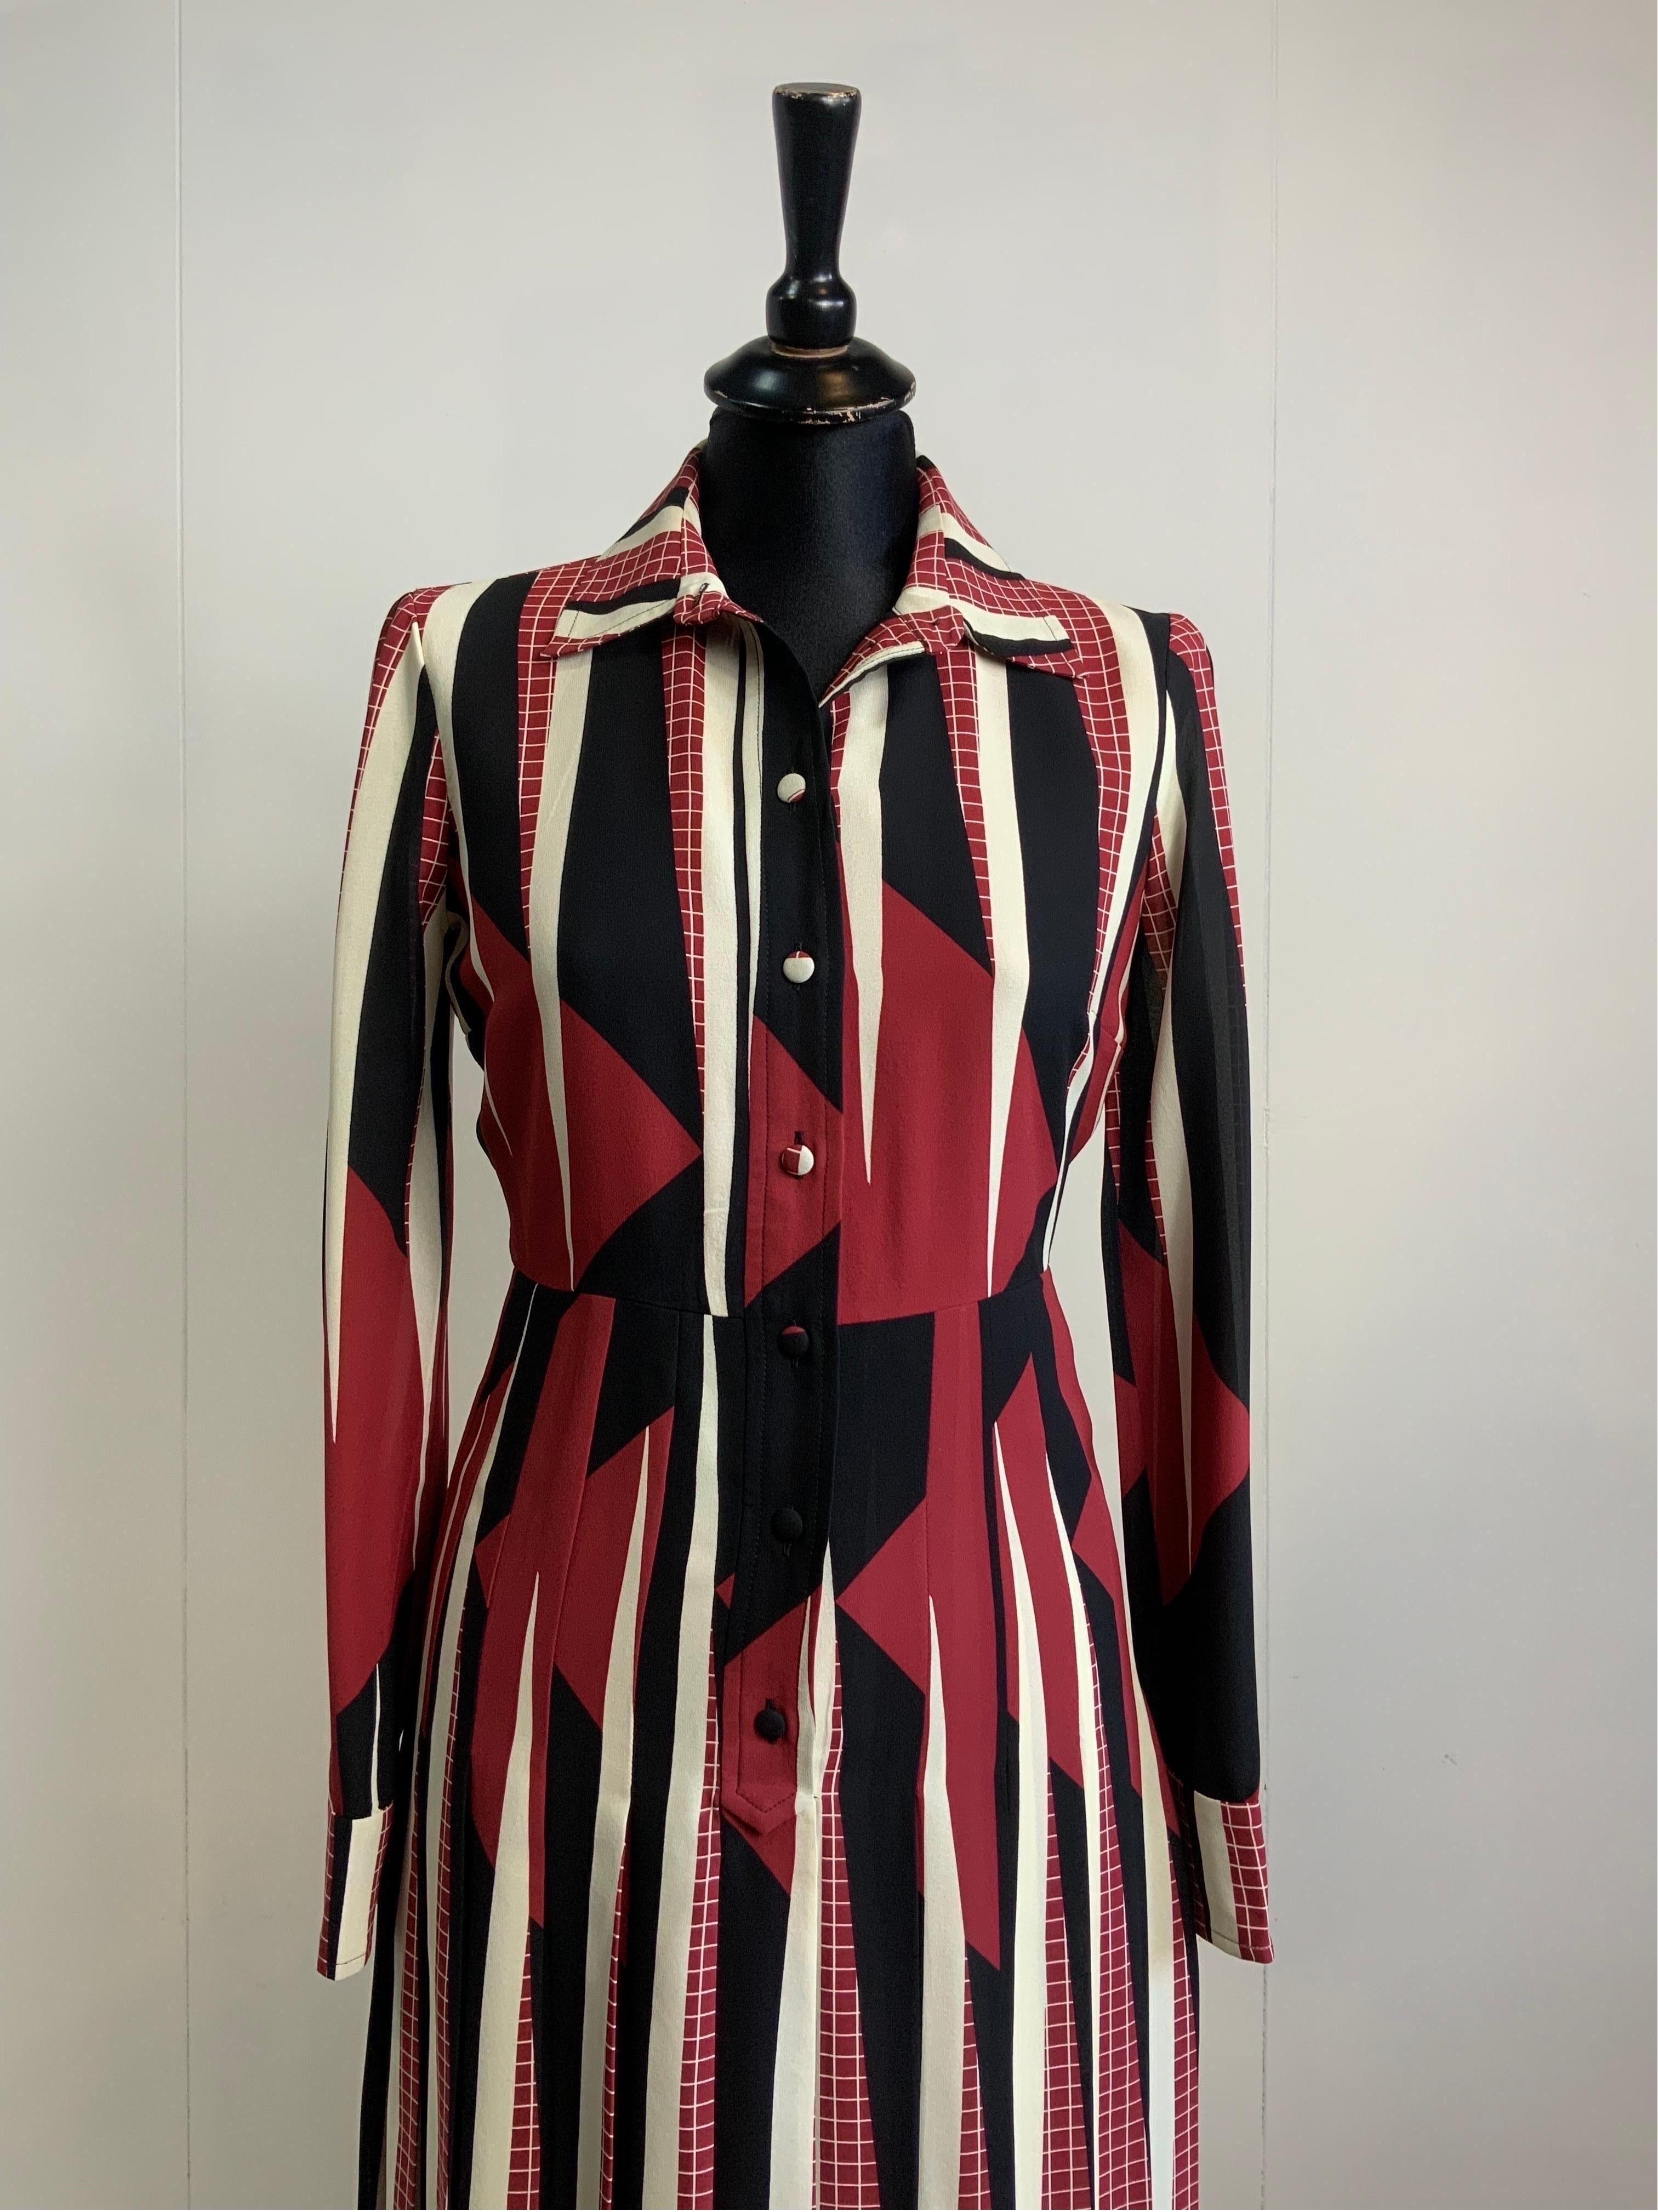 GUCCI DRESS.
Pre-Fall 2017
Made of 100% silk. Geometric pattern.
Italian size 36.
Shoulders 38 cm
Bust 42 cm
Waist 33 cm
Length 103 cm
Excellent general condition, with minimal signs of normal use.